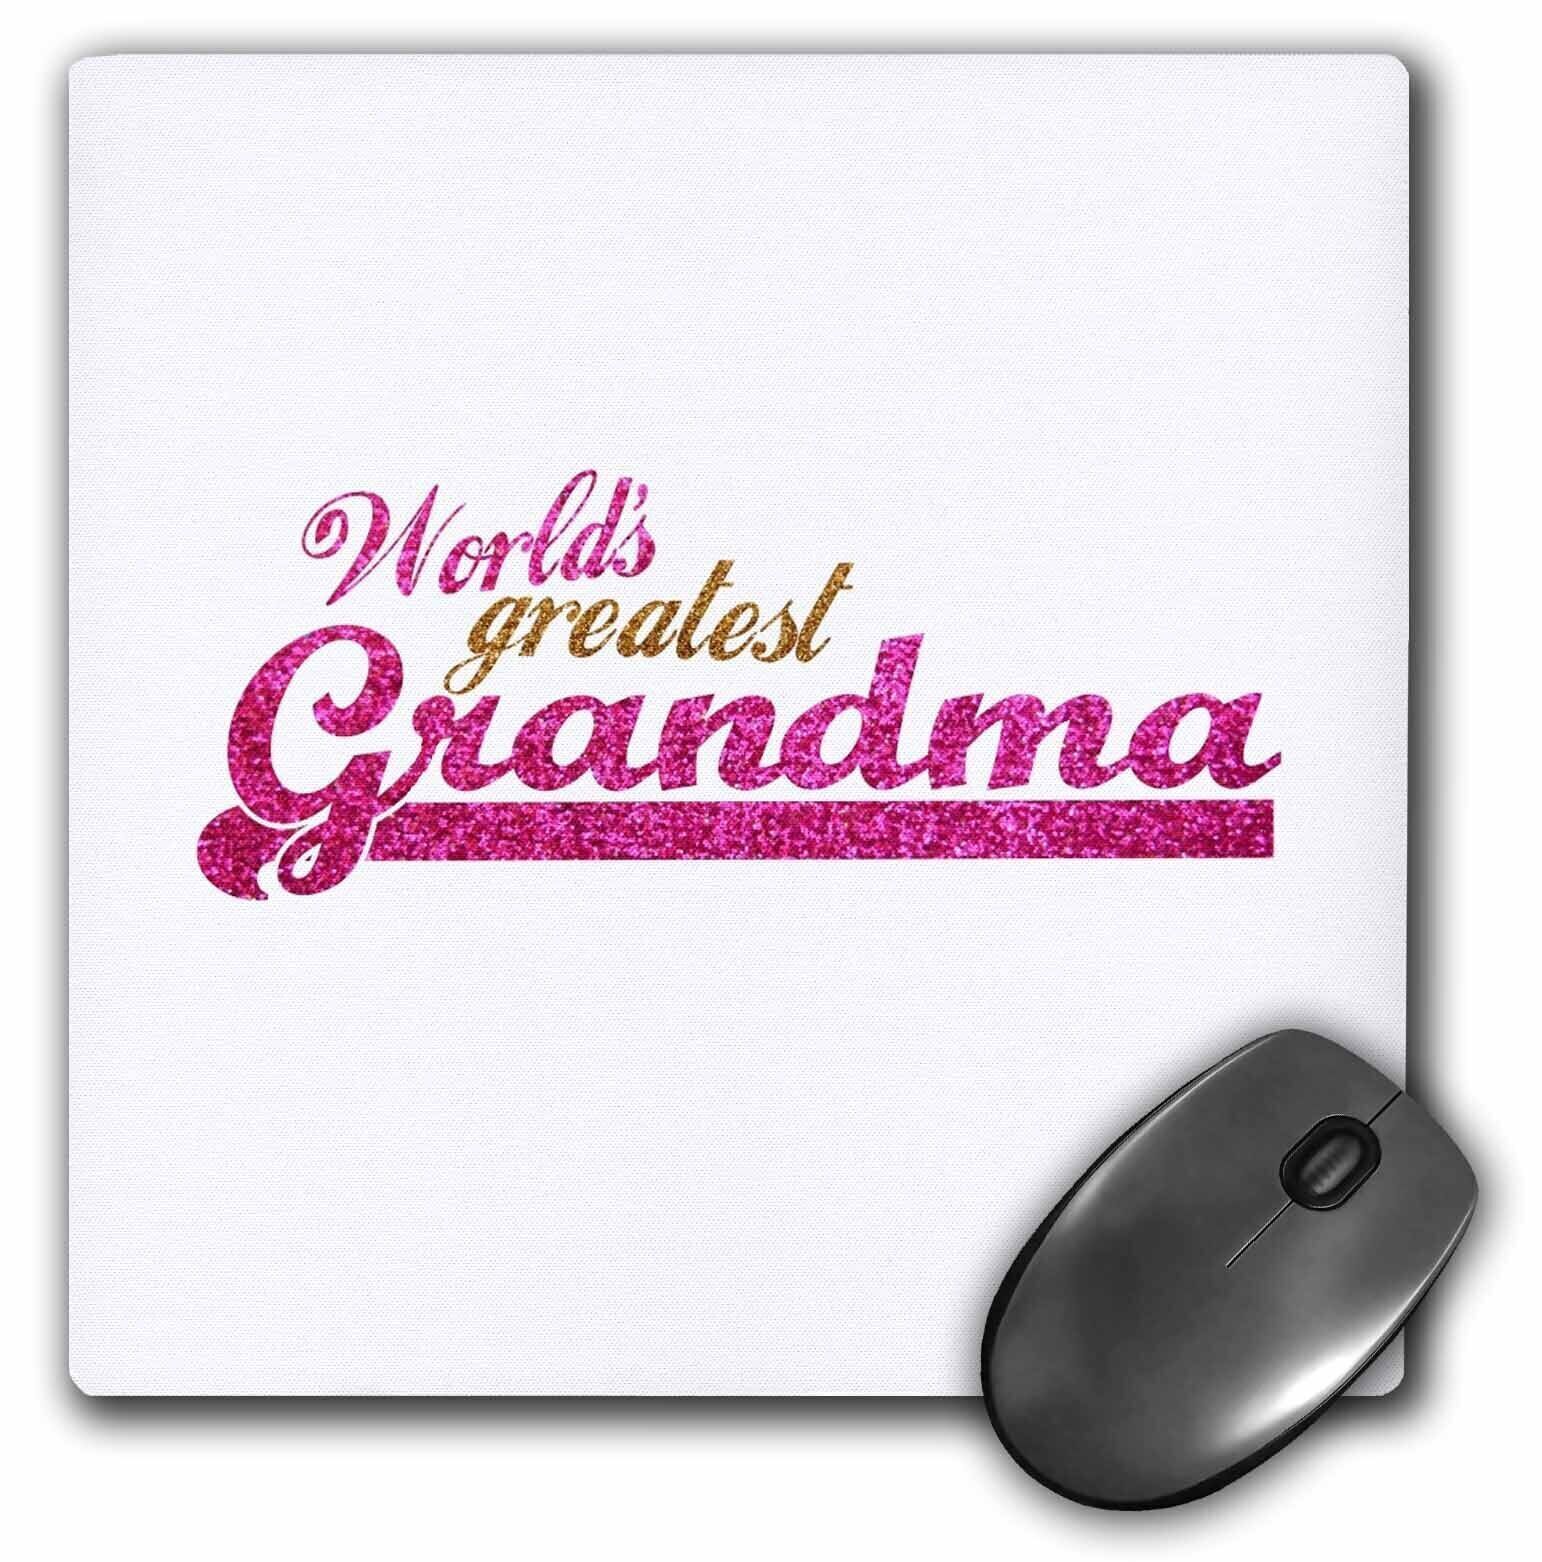 3dRose Worlds Greatest Grandma - Best Grandmother in the world - Granny gifts -